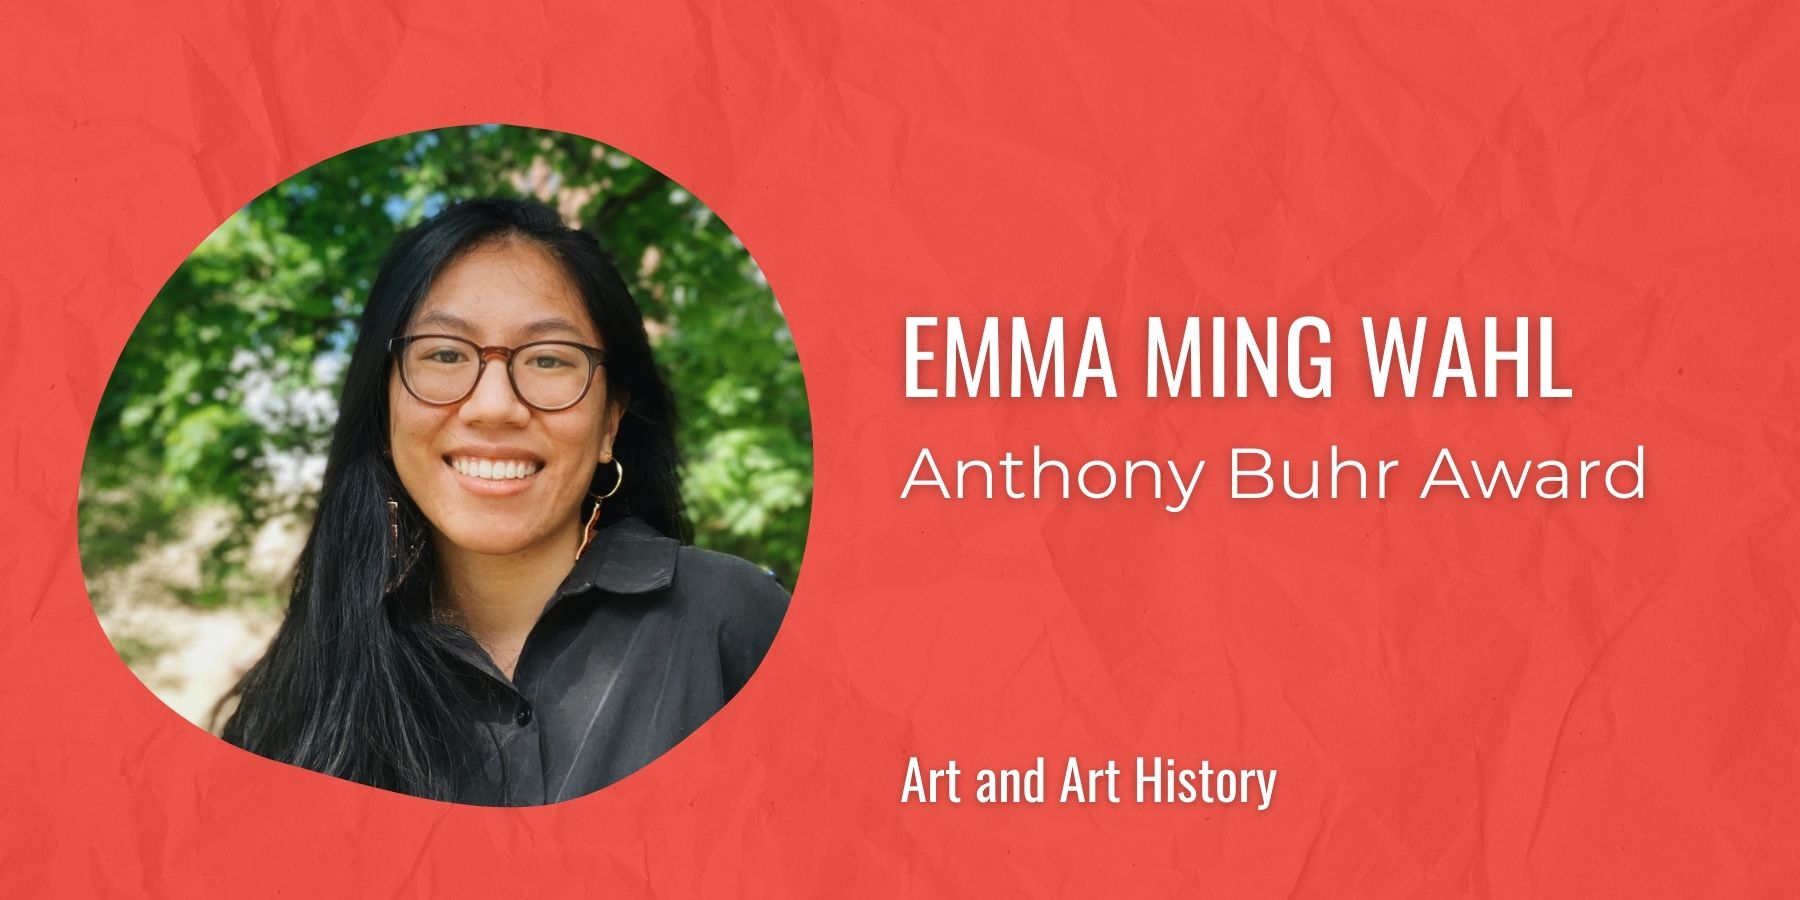 Image of Emma Wahl with text: Anthony Buhr Award, Art and Art History
